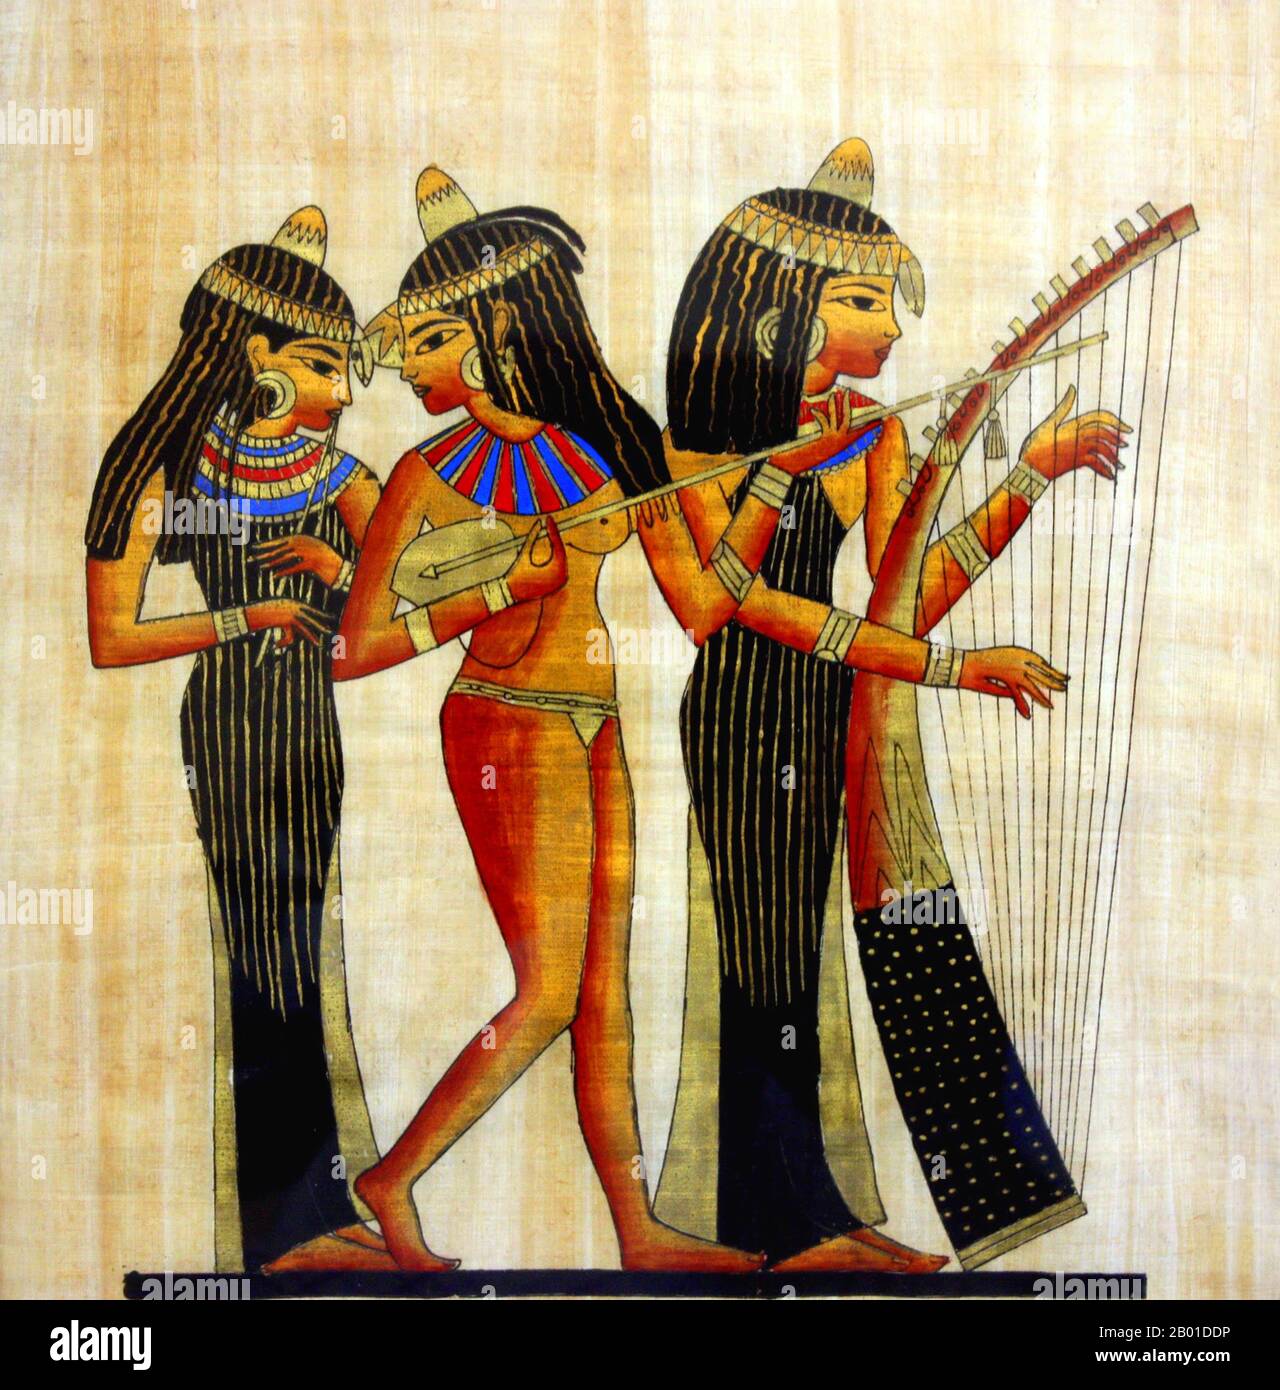 Egypt: Female musicians, modern painting on papyrus after 'Musicians of Amun', Tomb of Nakht, 18th Dynasty (1422-1411 BCE), Thebes.  The music of Egypt has been an integral part of Egyptian culture since ancient times. The ancient Egyptians credited one of their Gods Thoth with the invention of music, which Osiris in turn used as part of his effort to civilise the world.  The earliest material and representational evidence of Egyptian musical instruments dates to the Predynastic period, but the evidence is more securely attested in the Old Kingdom. Stock Photo